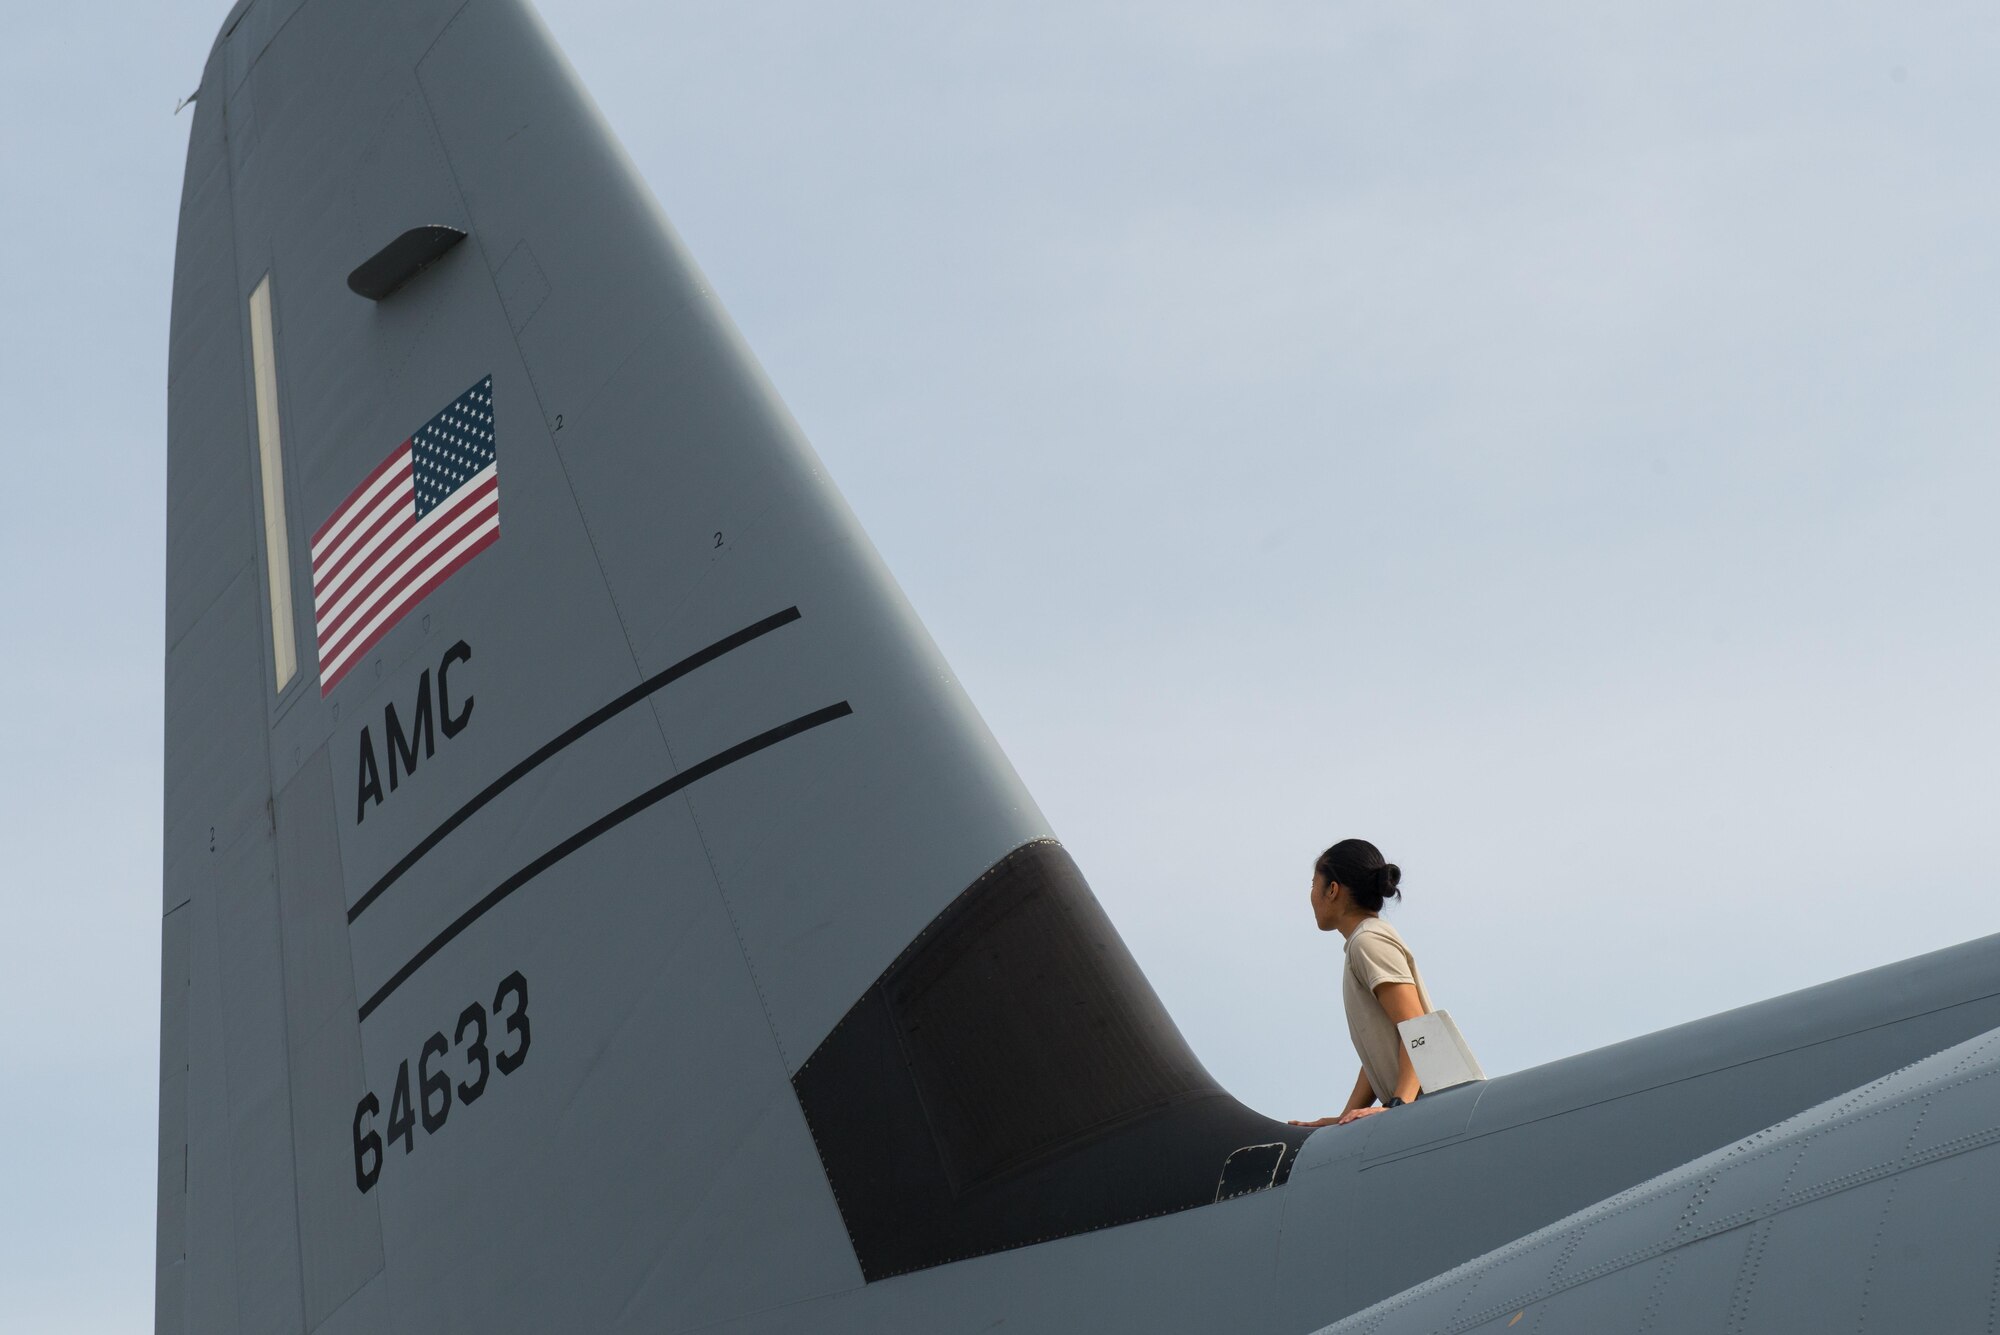 U.S. Air Force Senior Airman Mina Phouangphidok, assigned to the 455th Expeditionary Aircraft Maintenance Squadron, inspects the tail section on a C-130J Super Hercules aircraft during a post flight inspection on the flight line at Bagram Airfield, Afghanistan, May 5, 2015.  The 455th EAMXS ensure Super Hercules on Bagram are prepared for flight and return them to a mission-ready state once they land.  (U.S. Air Force photo by Tech. Sgt. Joseph Swafford/Released)